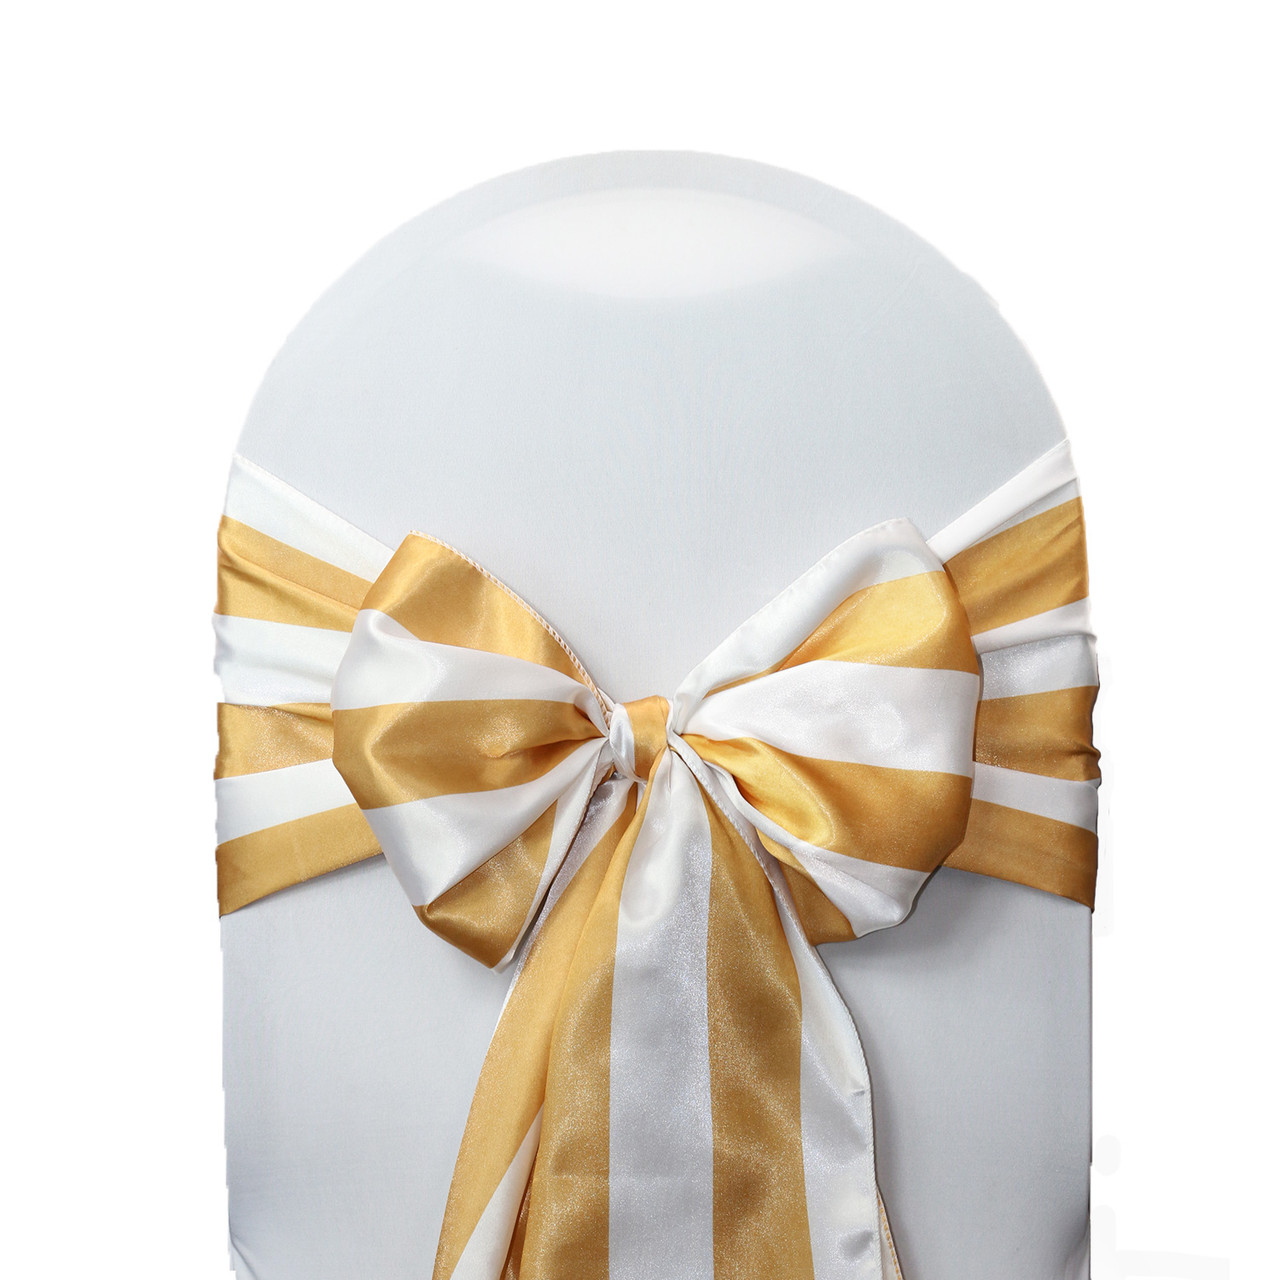 10 Pack Satin Sashes Gold/White Striped - Your Chair Covers Inc.